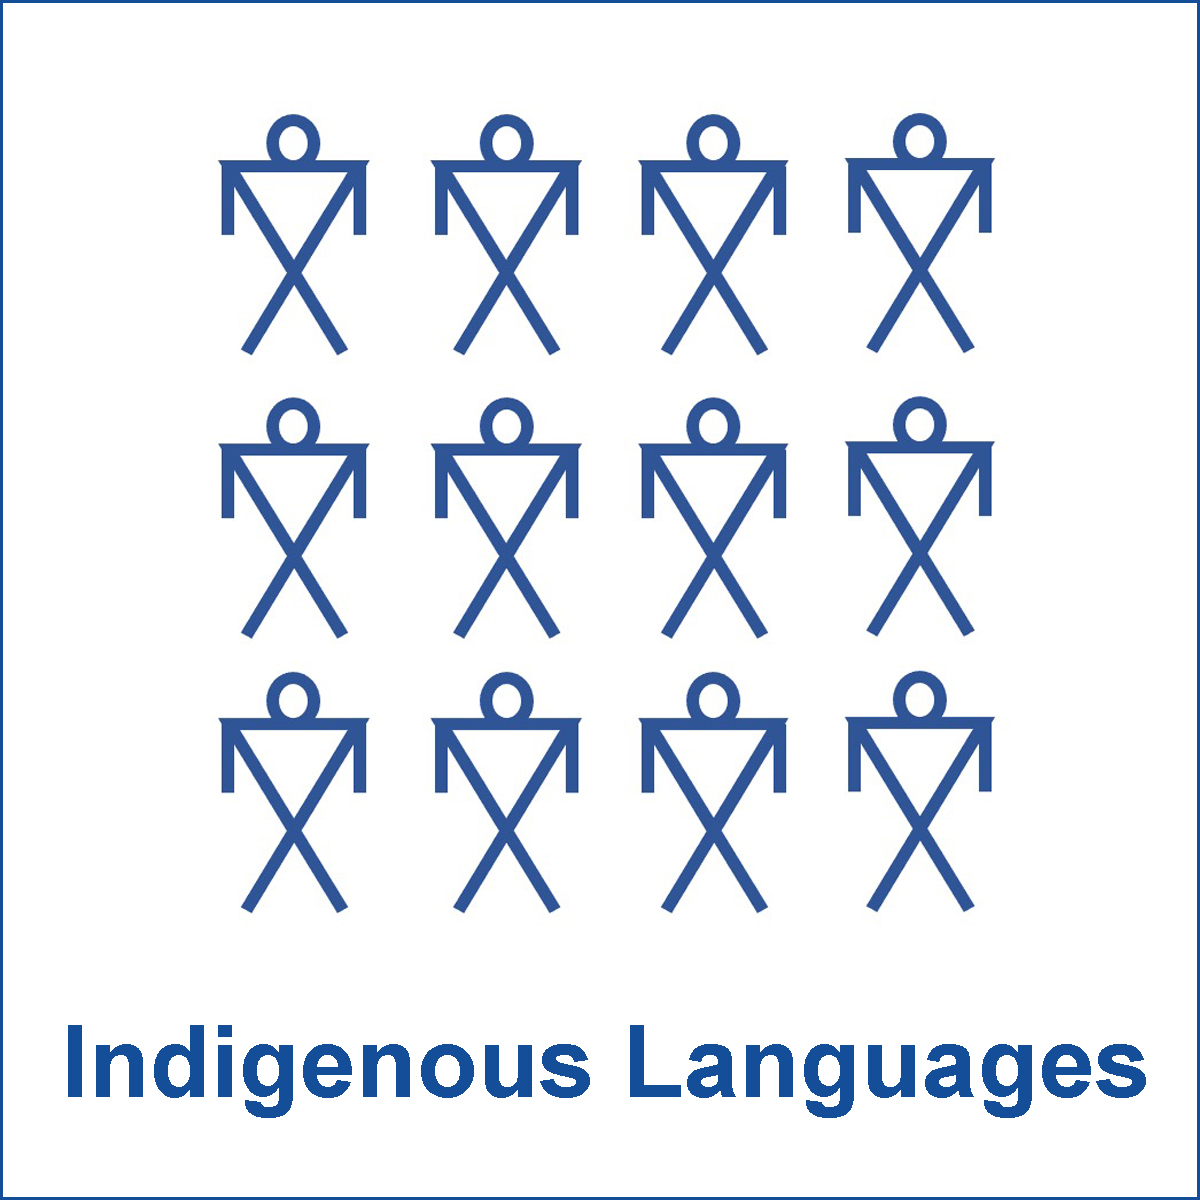 Artwork for the section on Indigenous Languages in the Saagajiwe Indigenous Knowledges Open Source Encylopedia